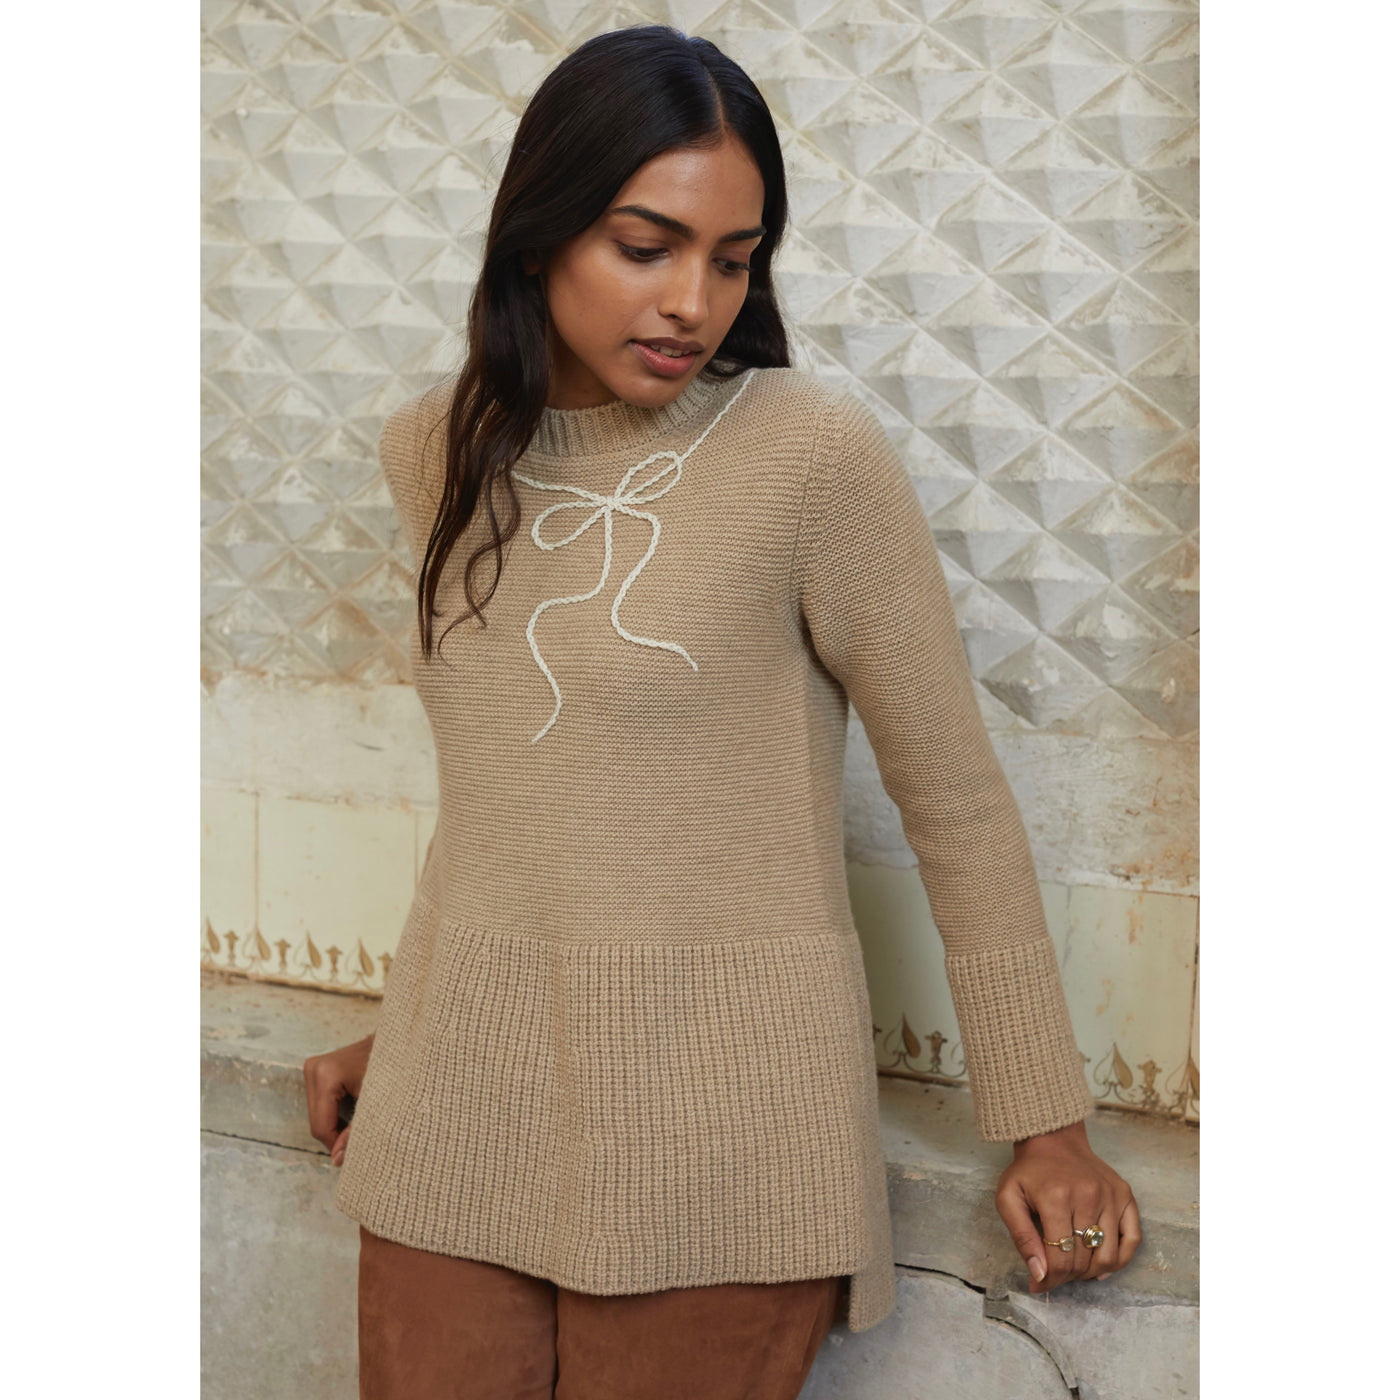 Teddy Sweater with Shoelace Bow - Beige